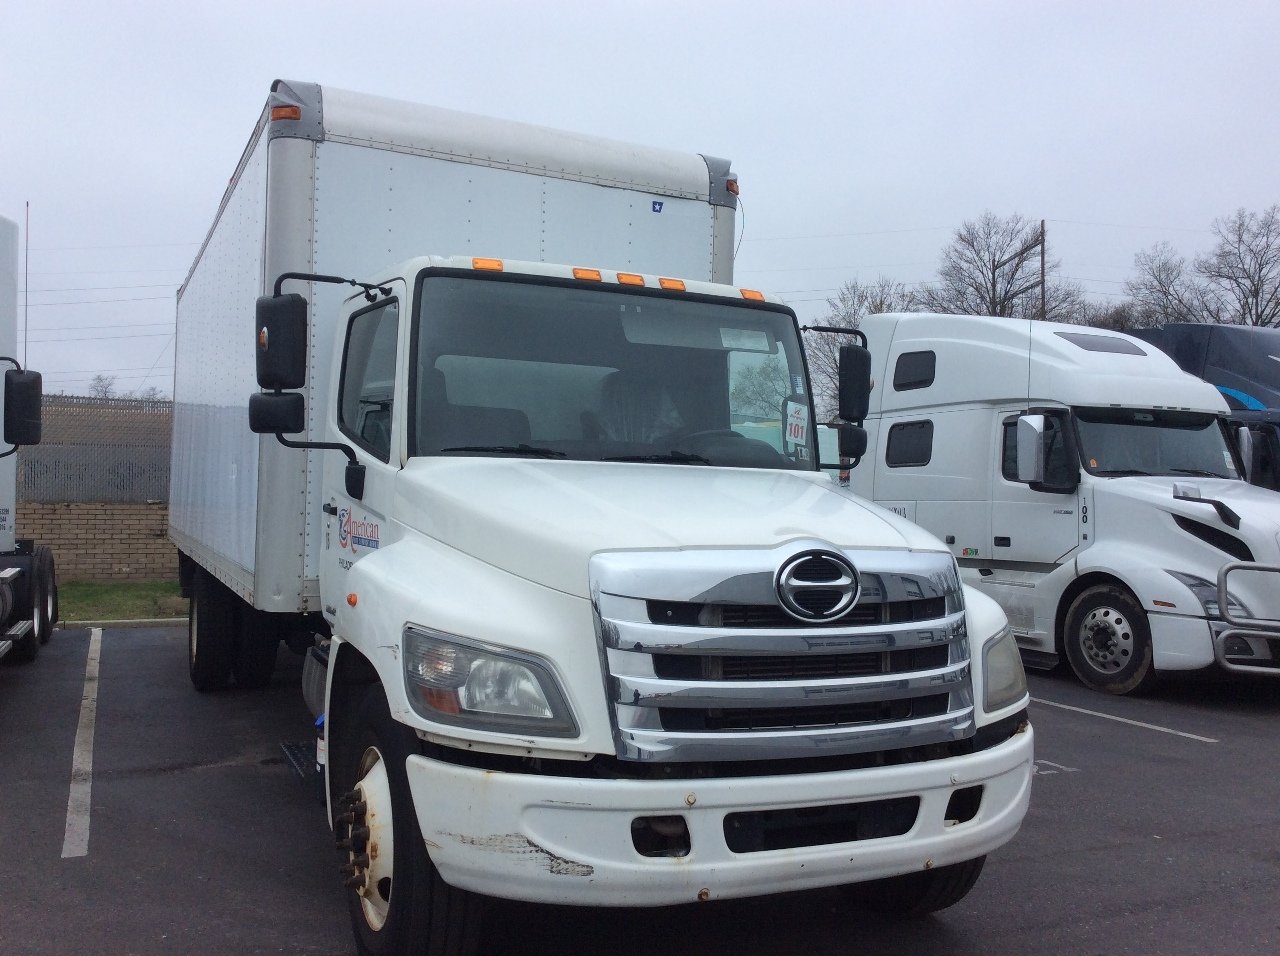 Used Truck Inventory - 1001821 02 2 - 51